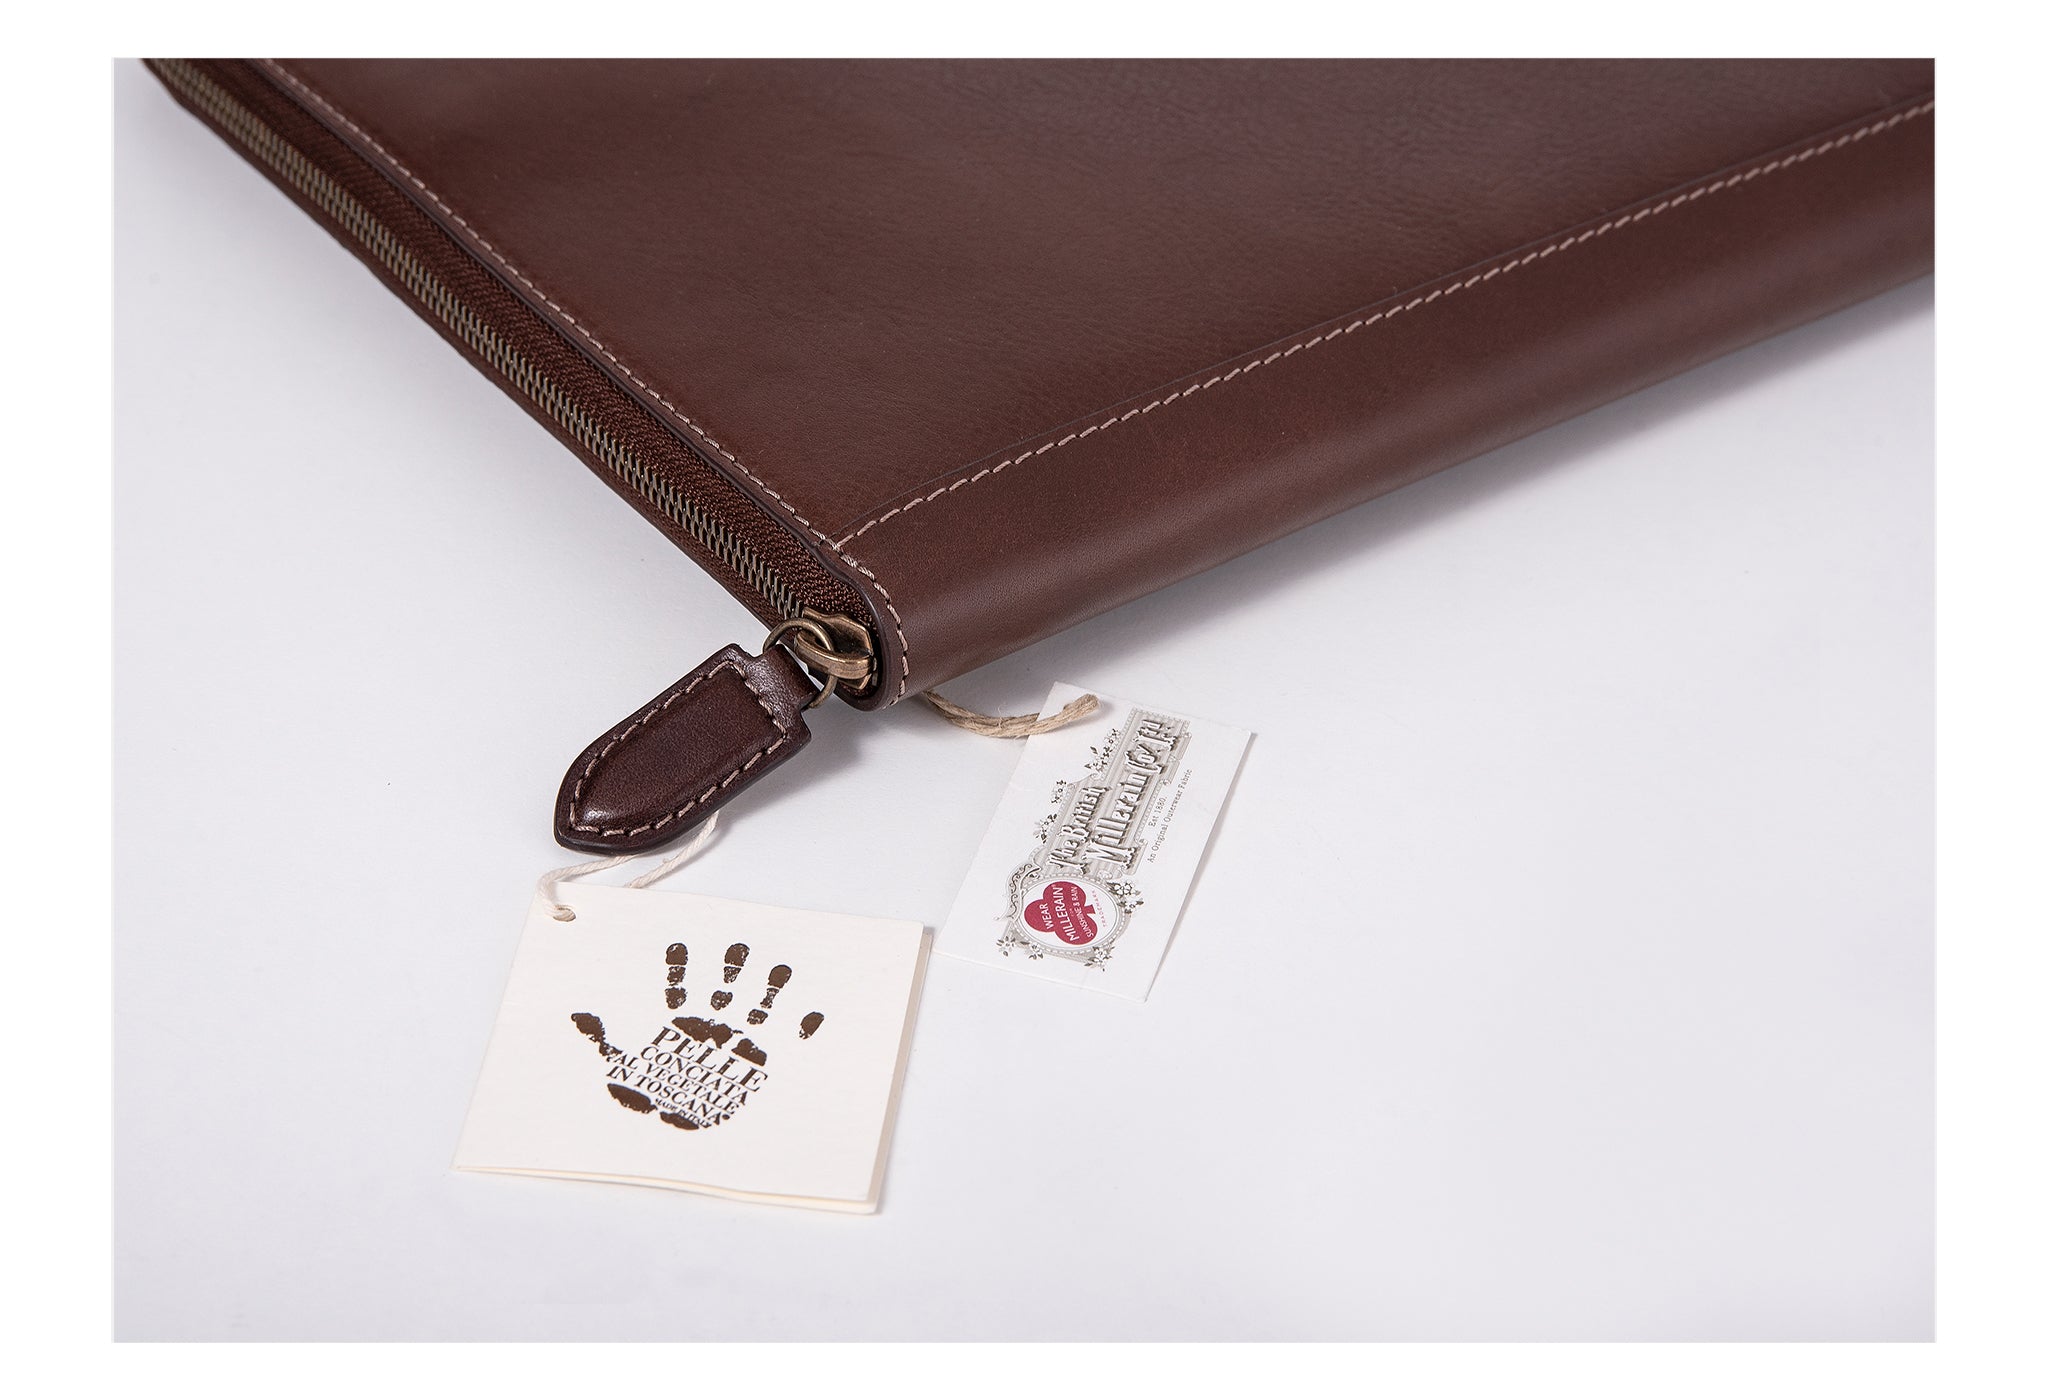 Albany Leather Document Holder from Rydal in 'Dark Brown' with Guarantee Labels.